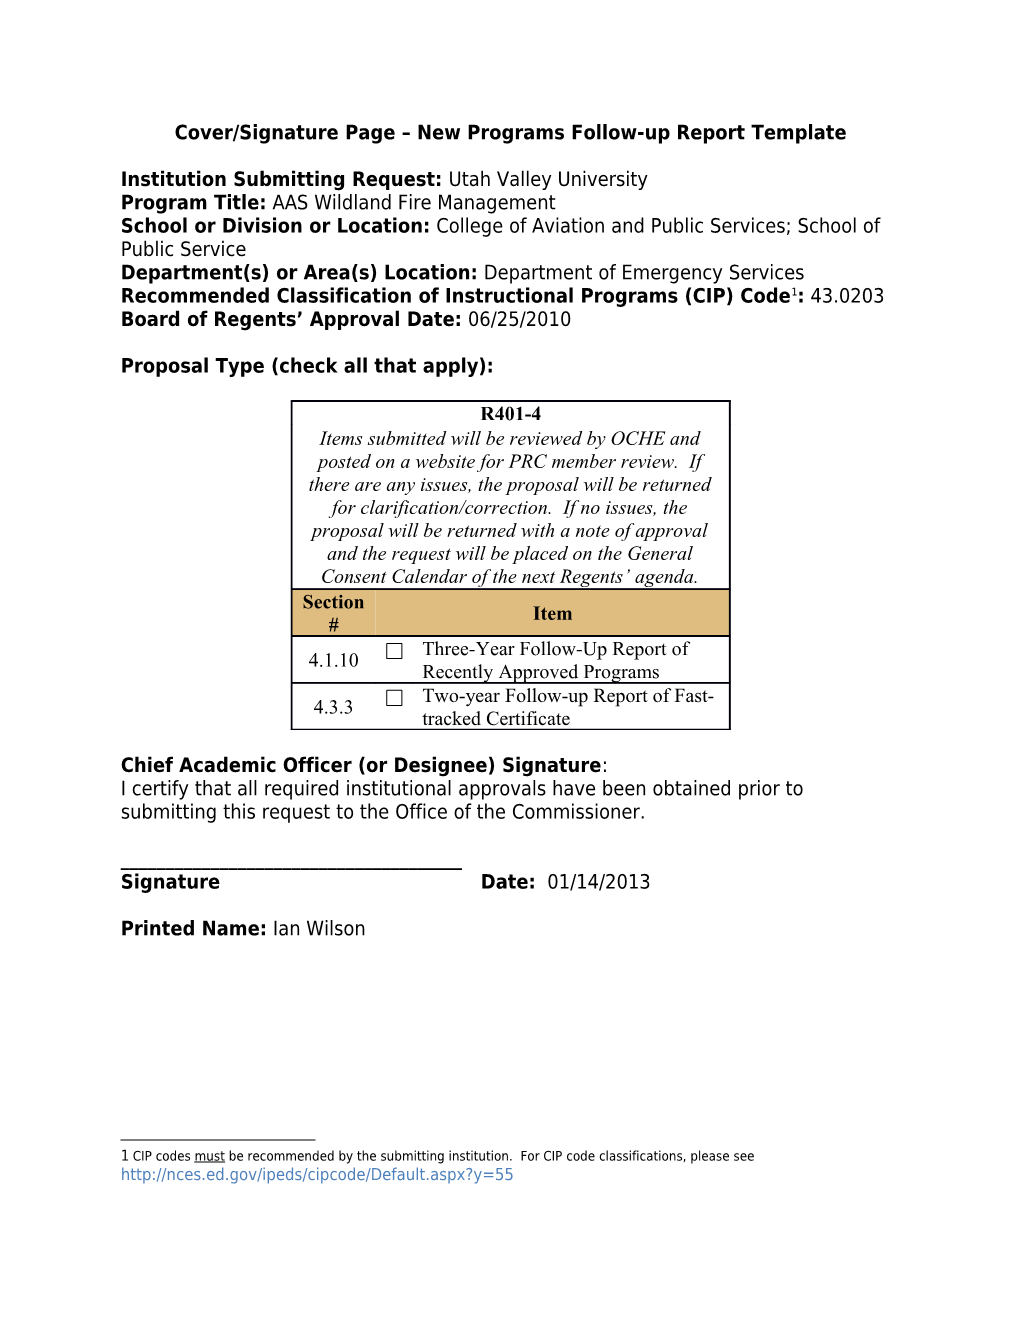 Cover/Signature Page New Programs Follow-Up Report Template